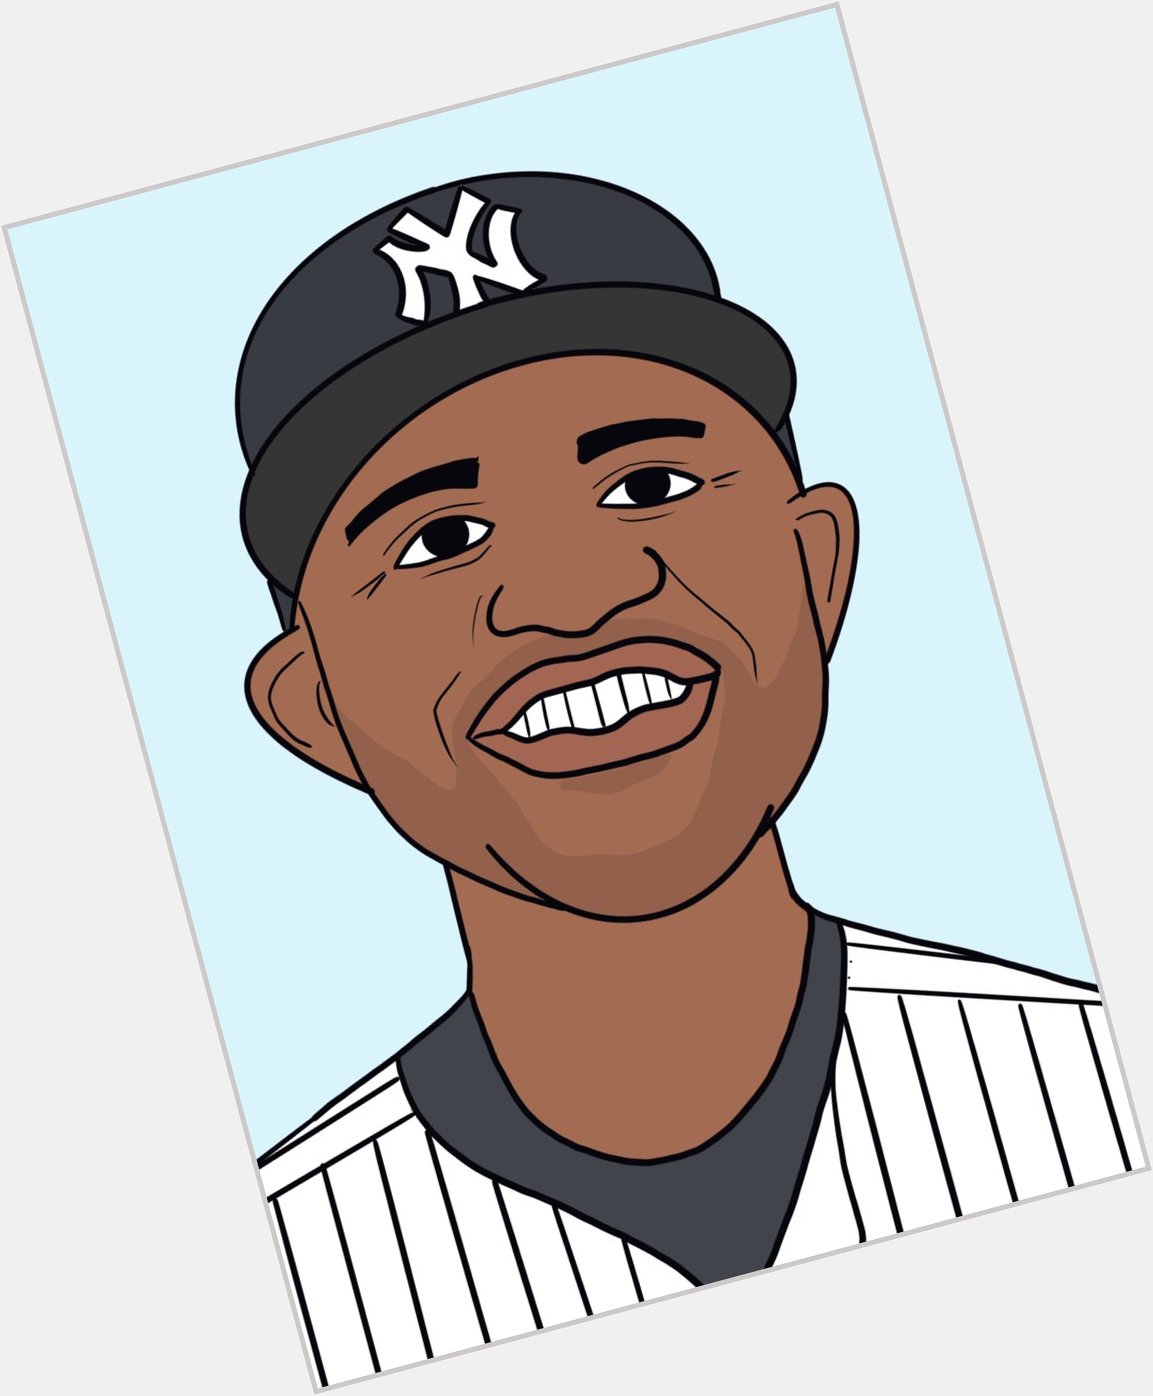 Last birthday shout out of the day comes with a new quick drawing. Happy Birthday to CC Sabathia! 